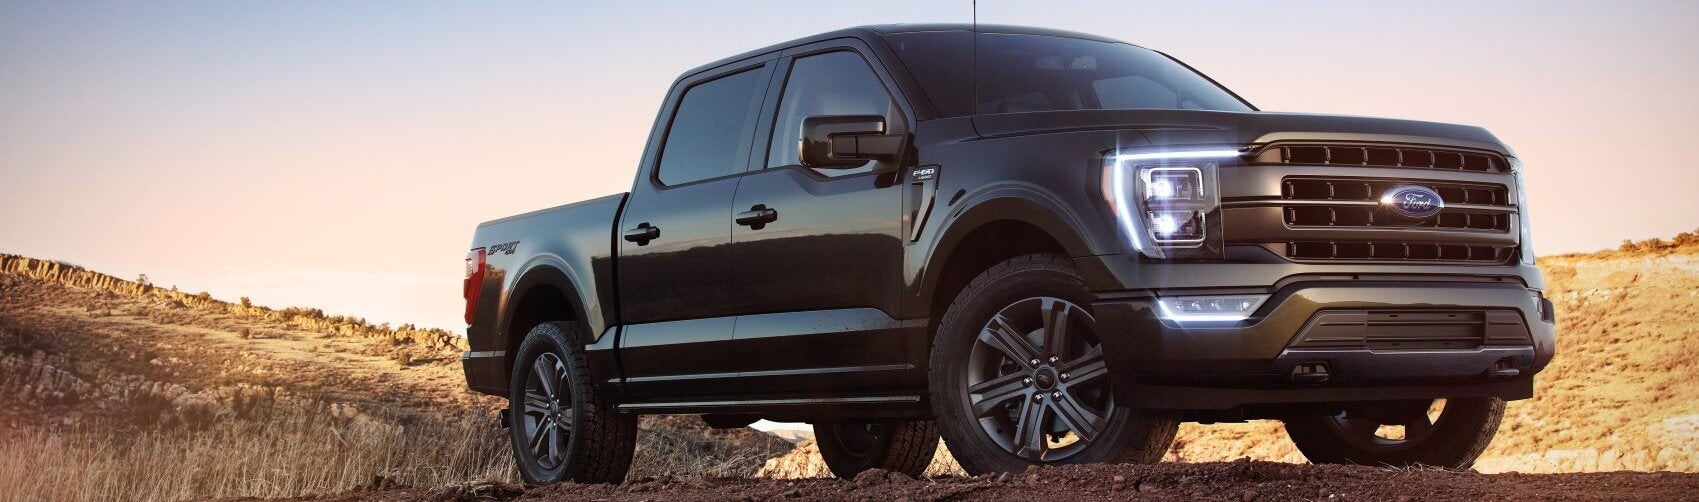 Ford F150 Sunset on Terrain Snipped